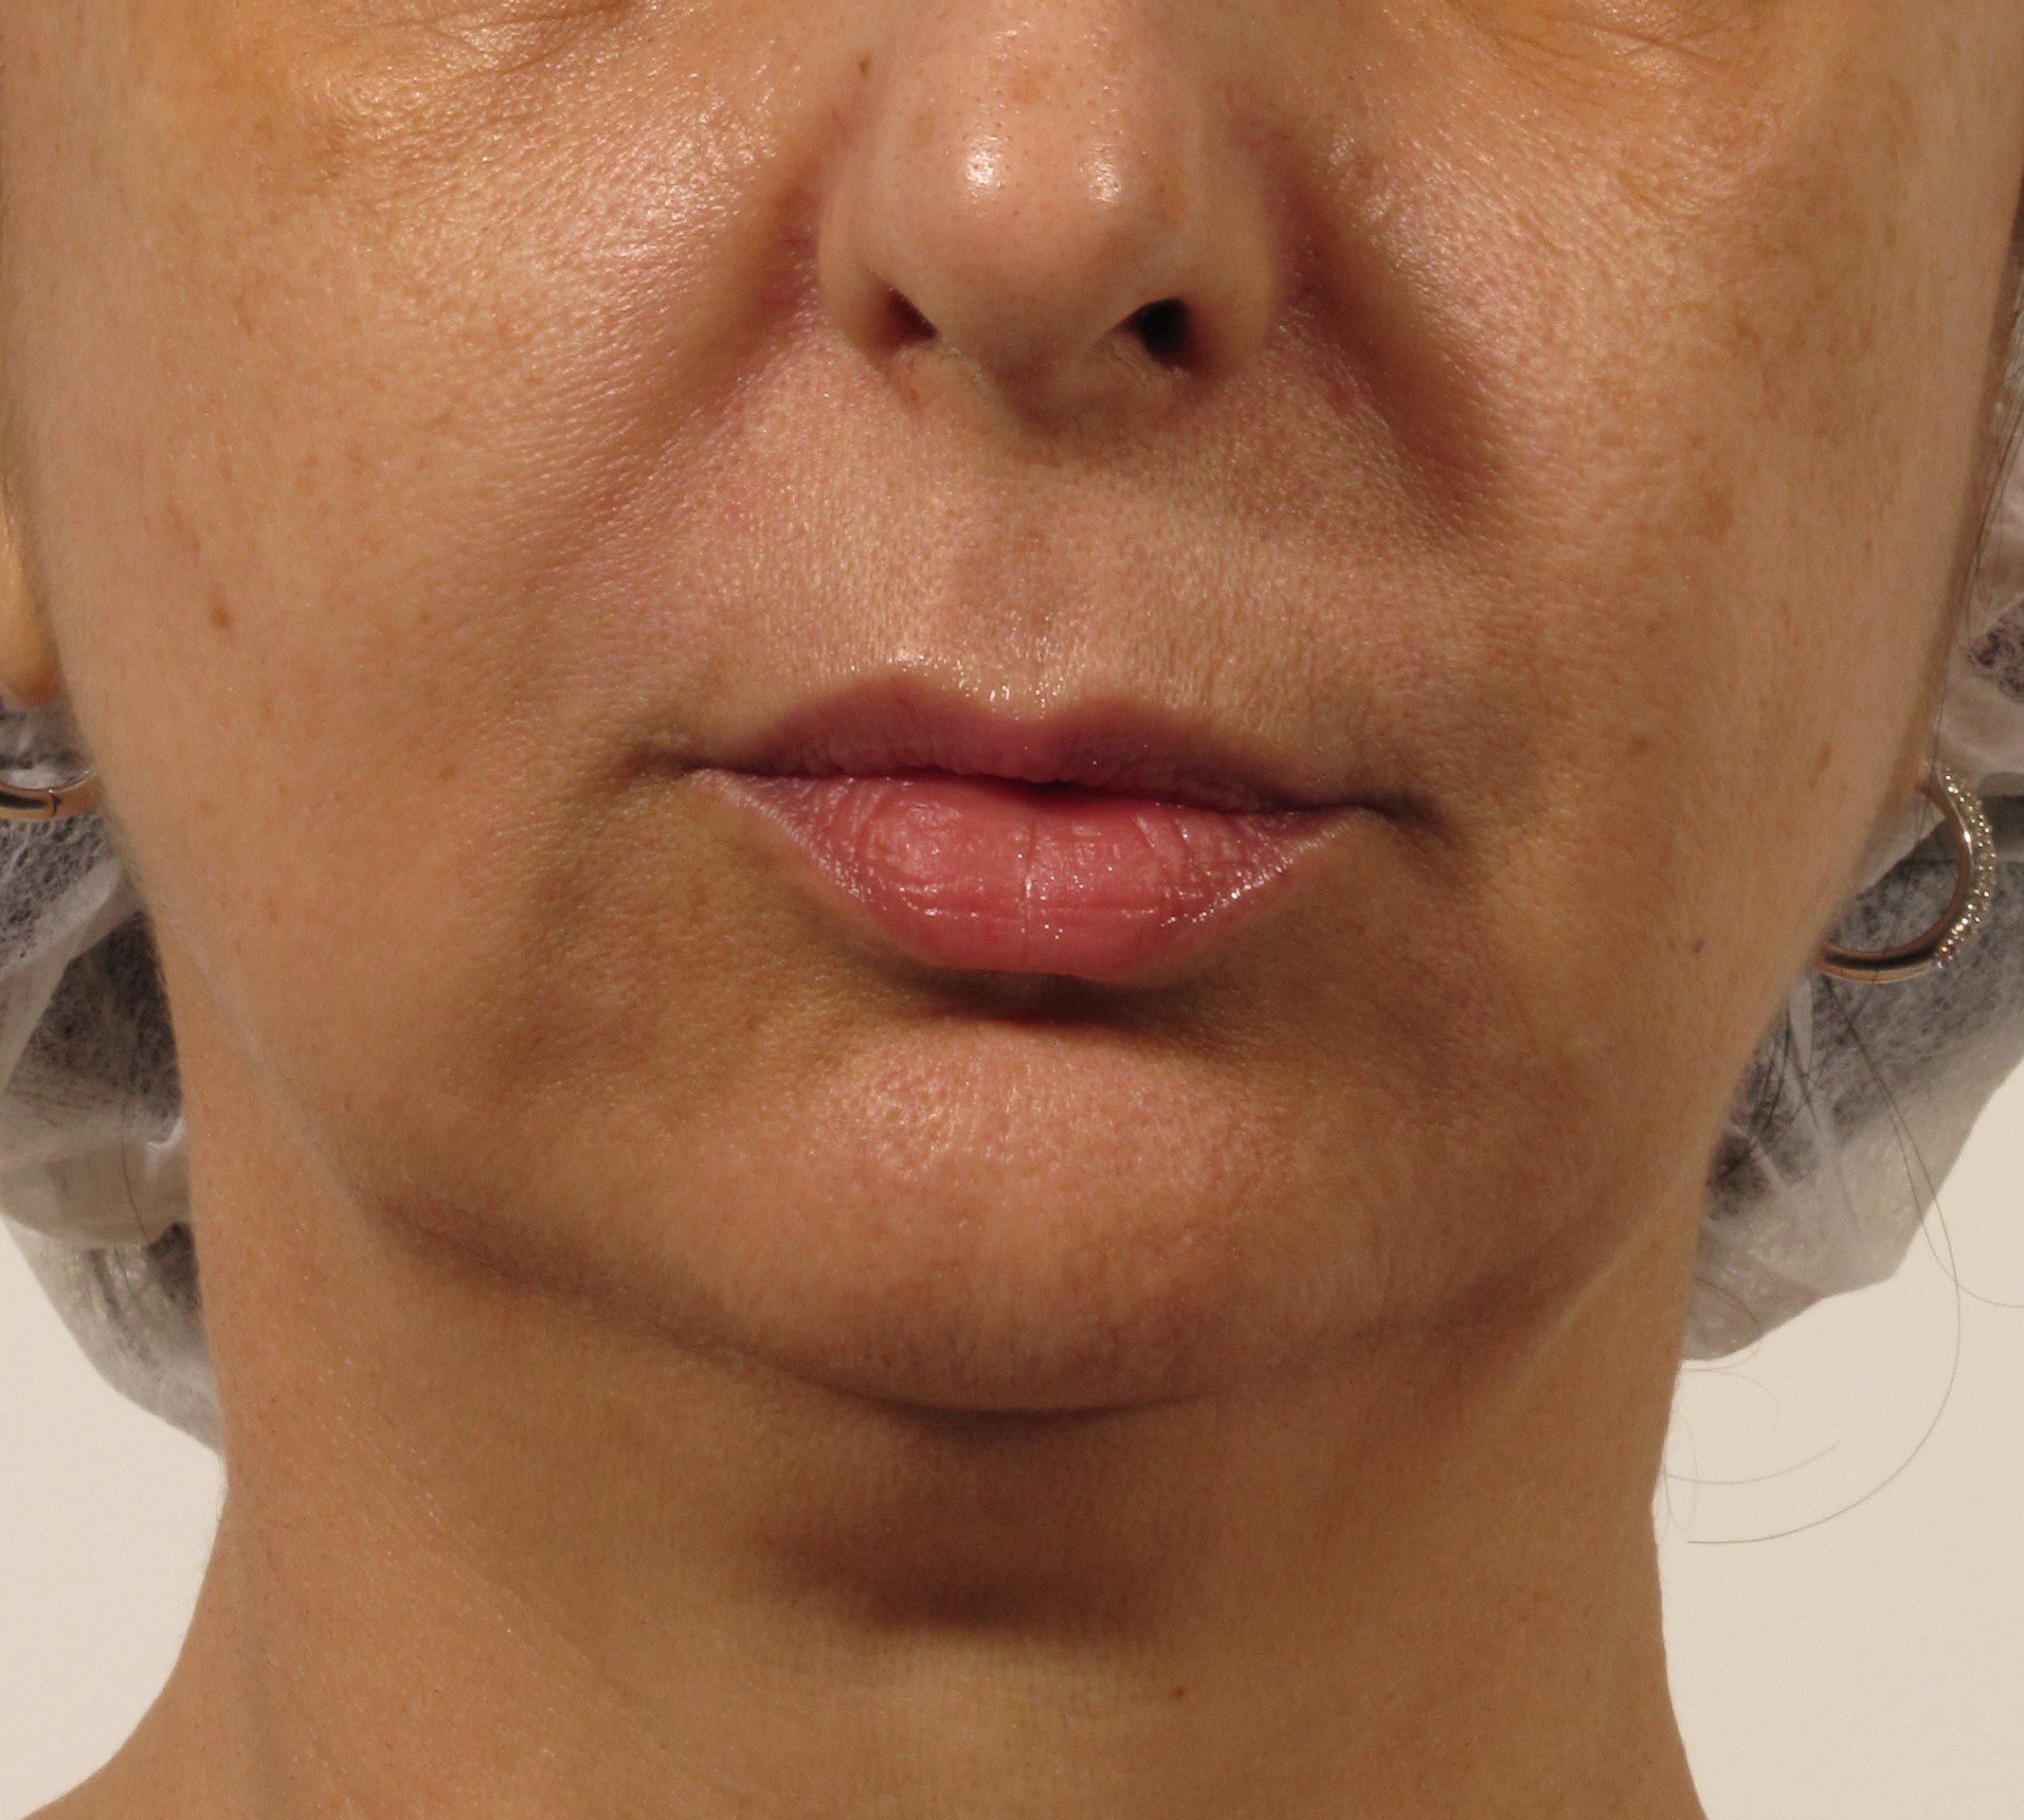 Oxygeneo4-Before-Mouth-Area.jpg